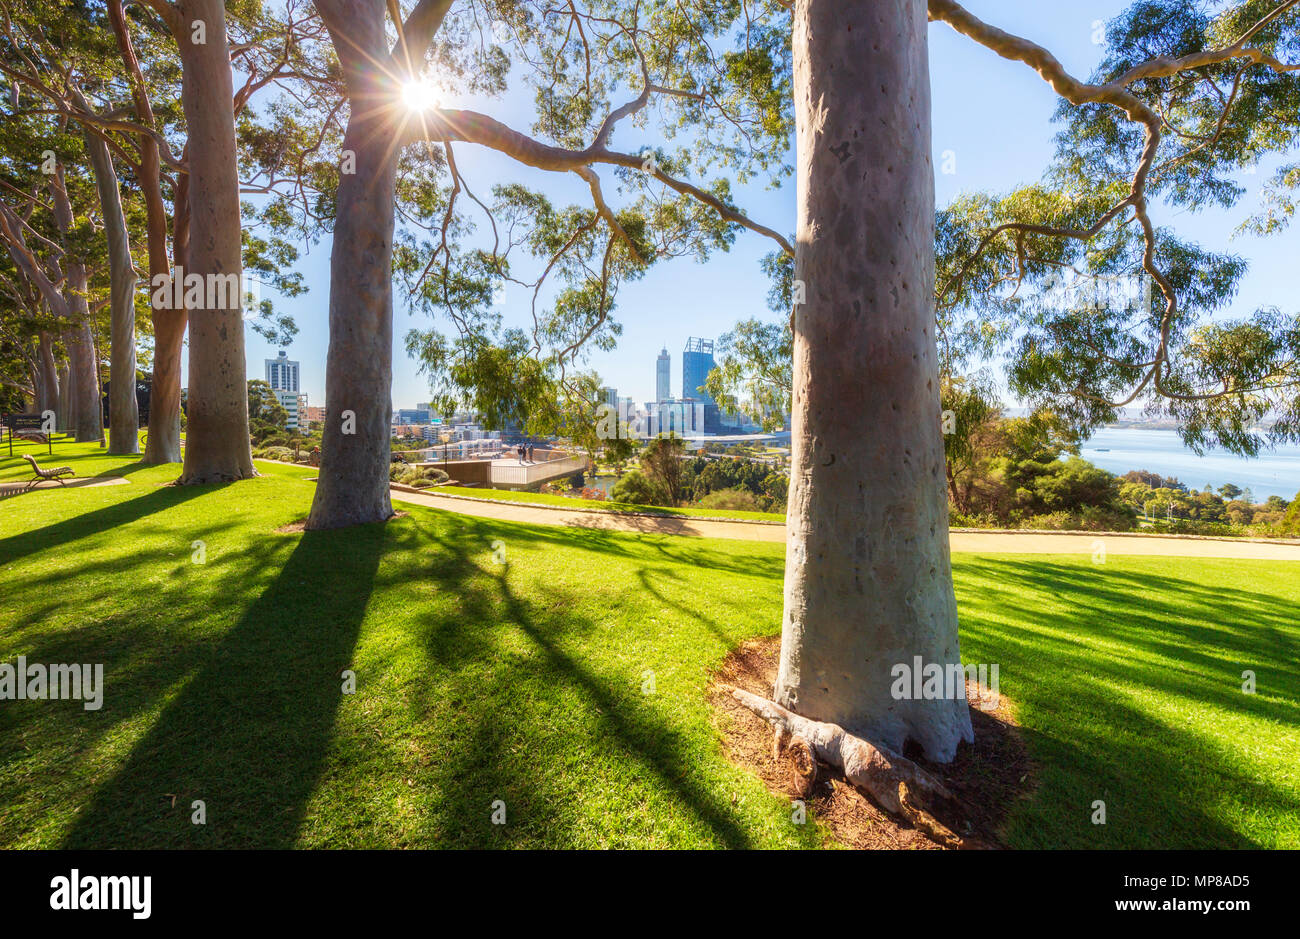 Lemon scented gum trees (Corymbia citriodora) lining Fraser Avenue in Kings Park, With Perth city and the Swan River in the distance. Perth, Australia Stock Photo